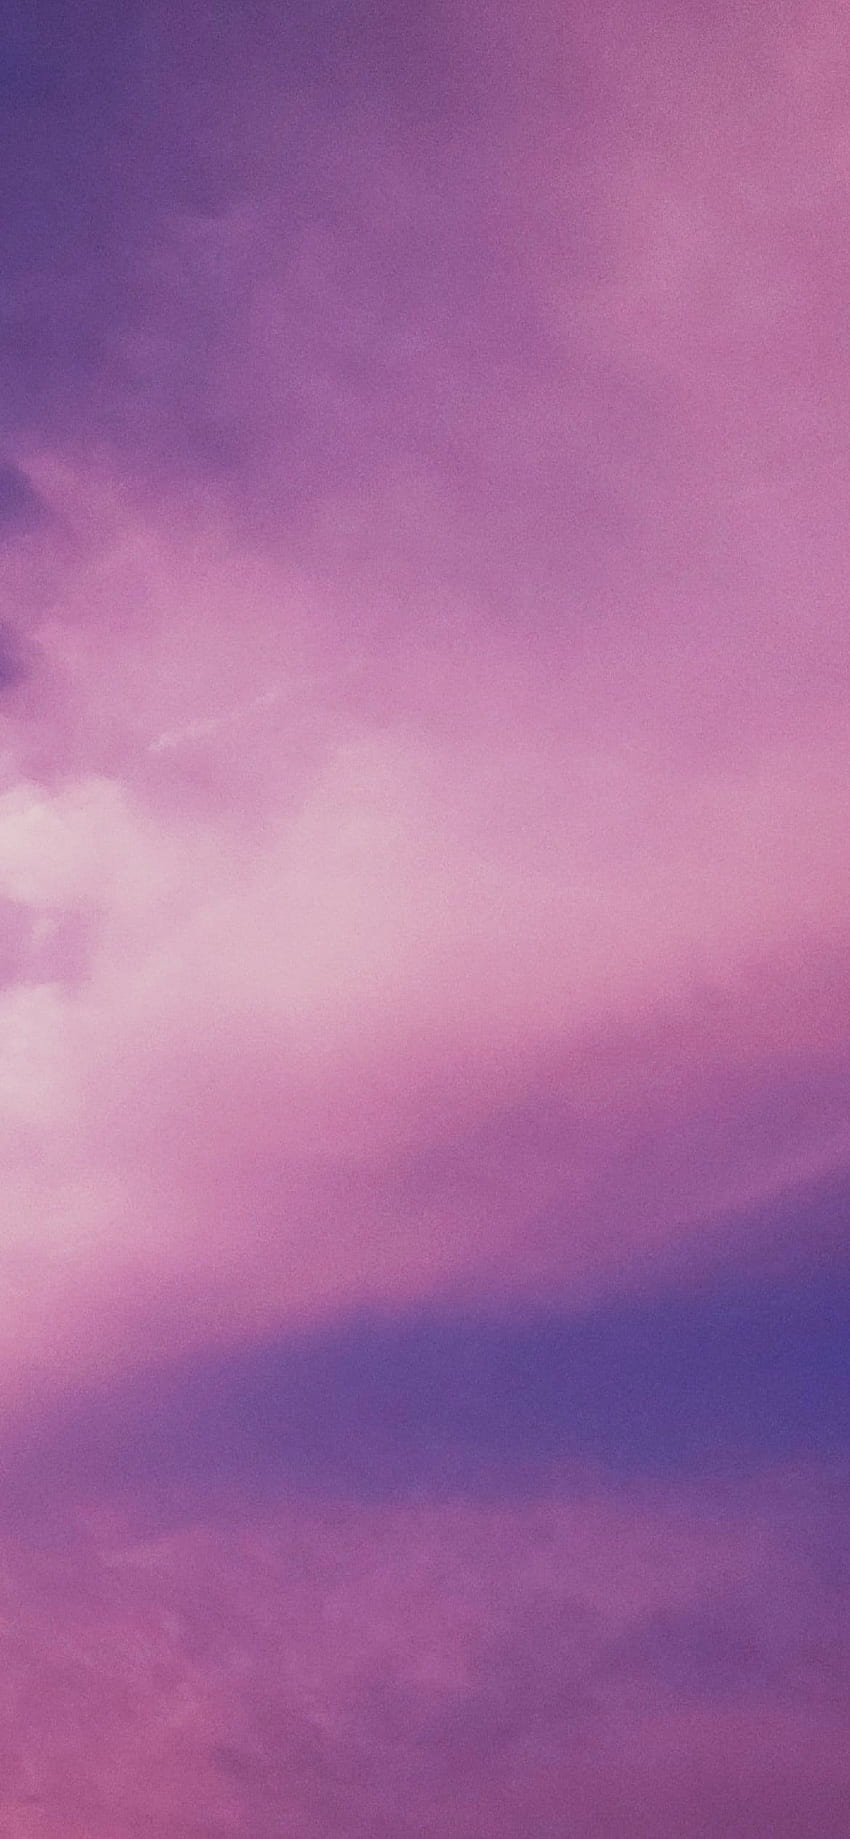 Aesthetic pink and purple background HD wallpapers | Pxfuel